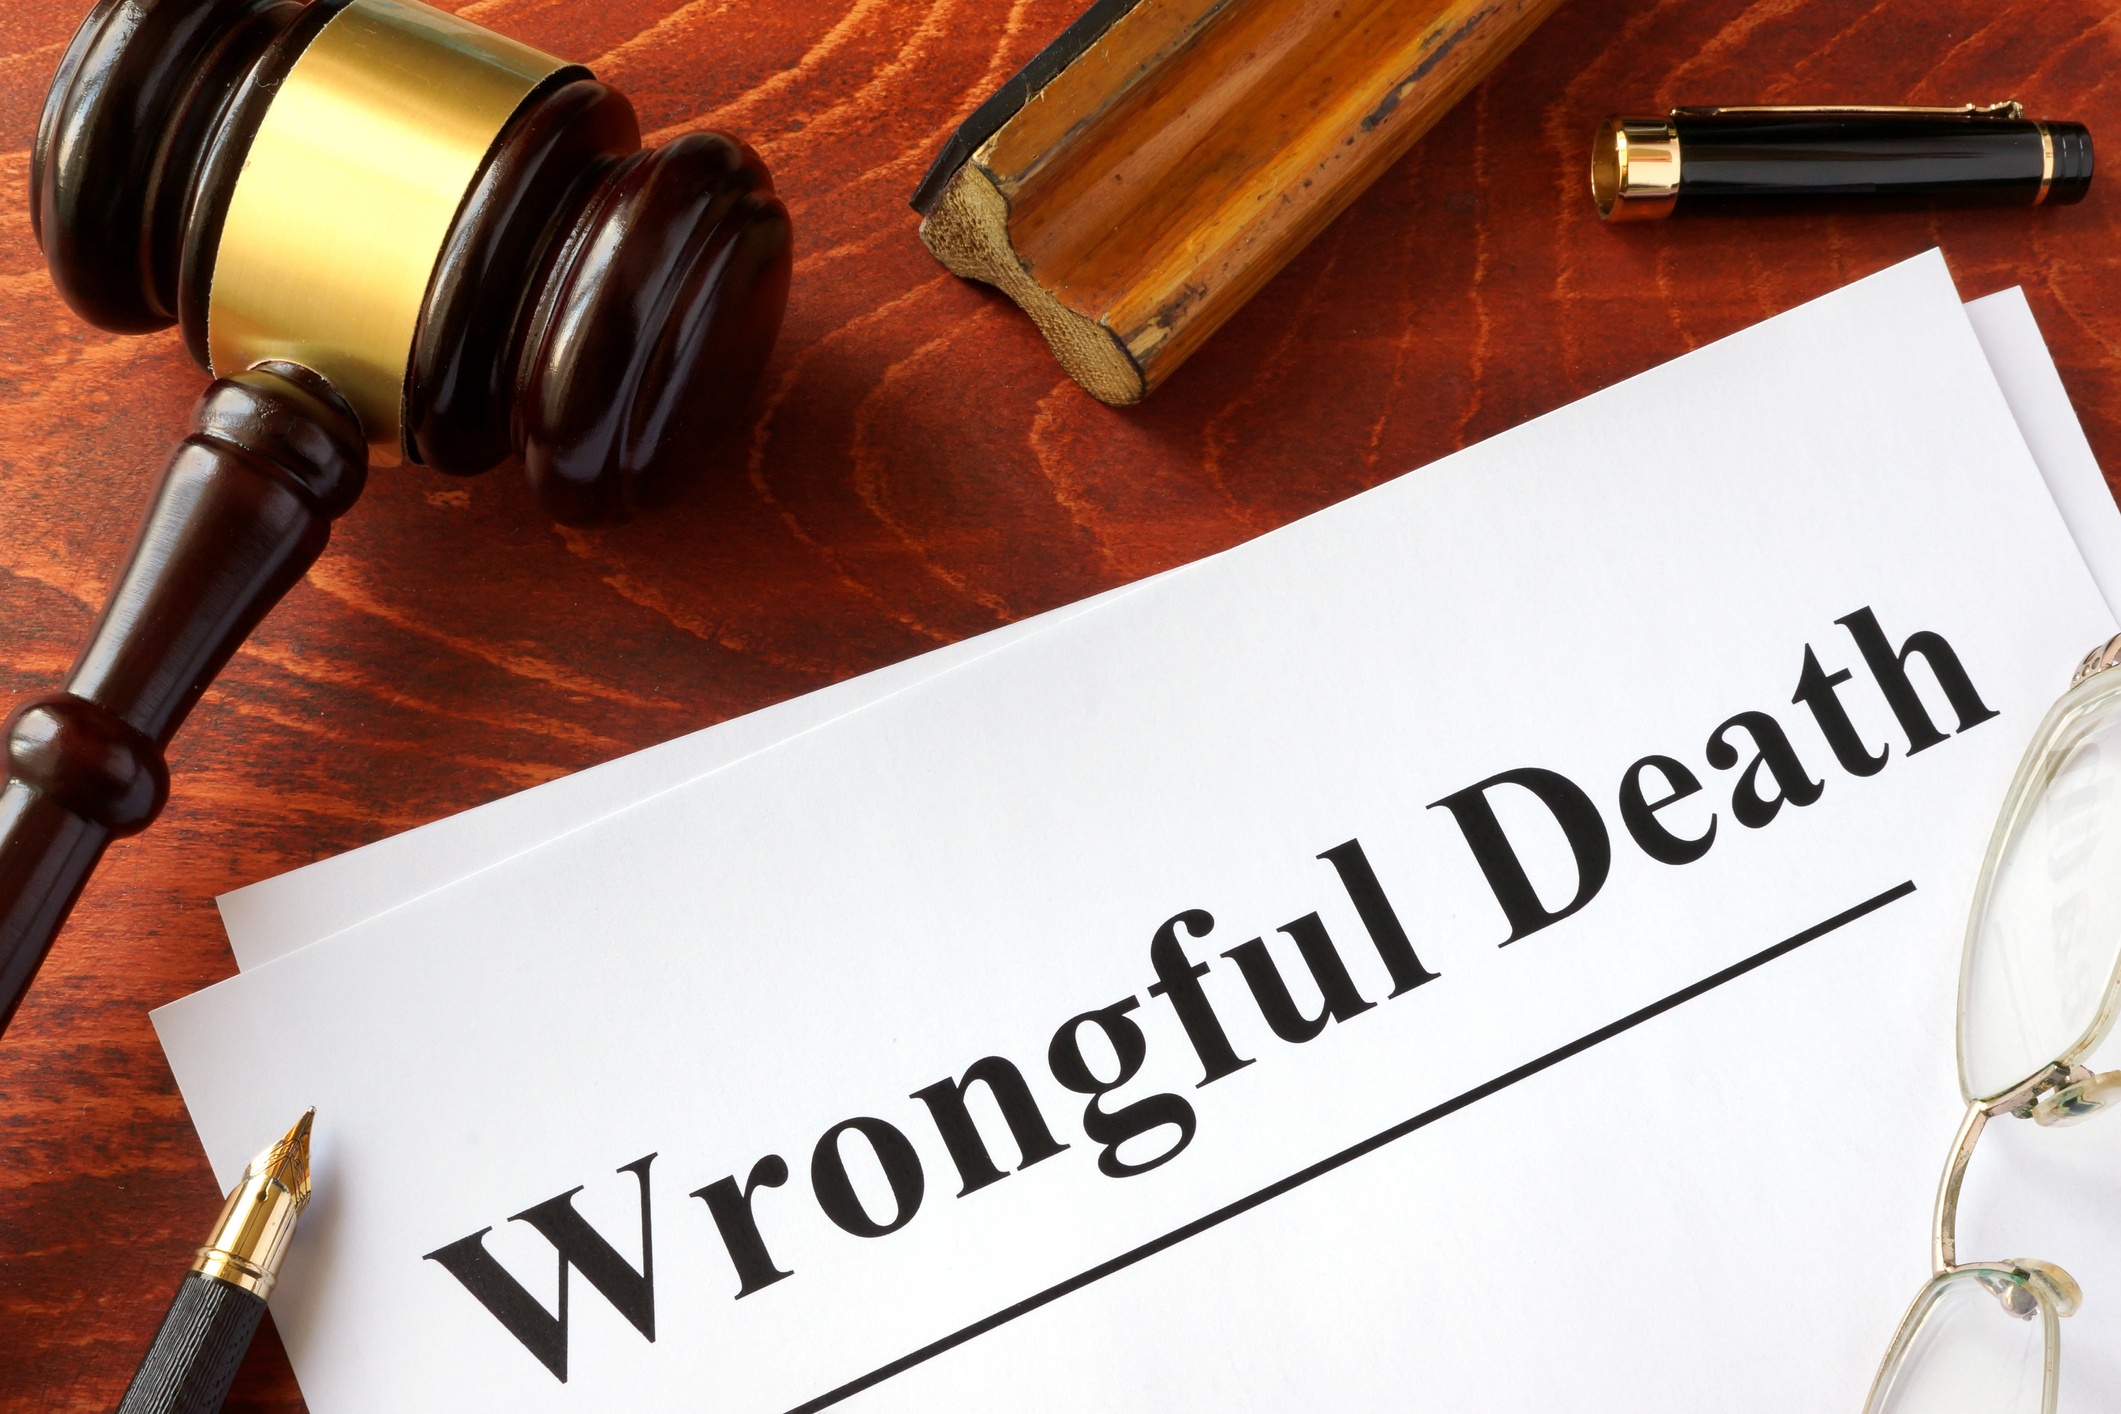 Widow’s Wrongful Death Claim Dismissed by New Jersey Courts Due to Statute of Limitations